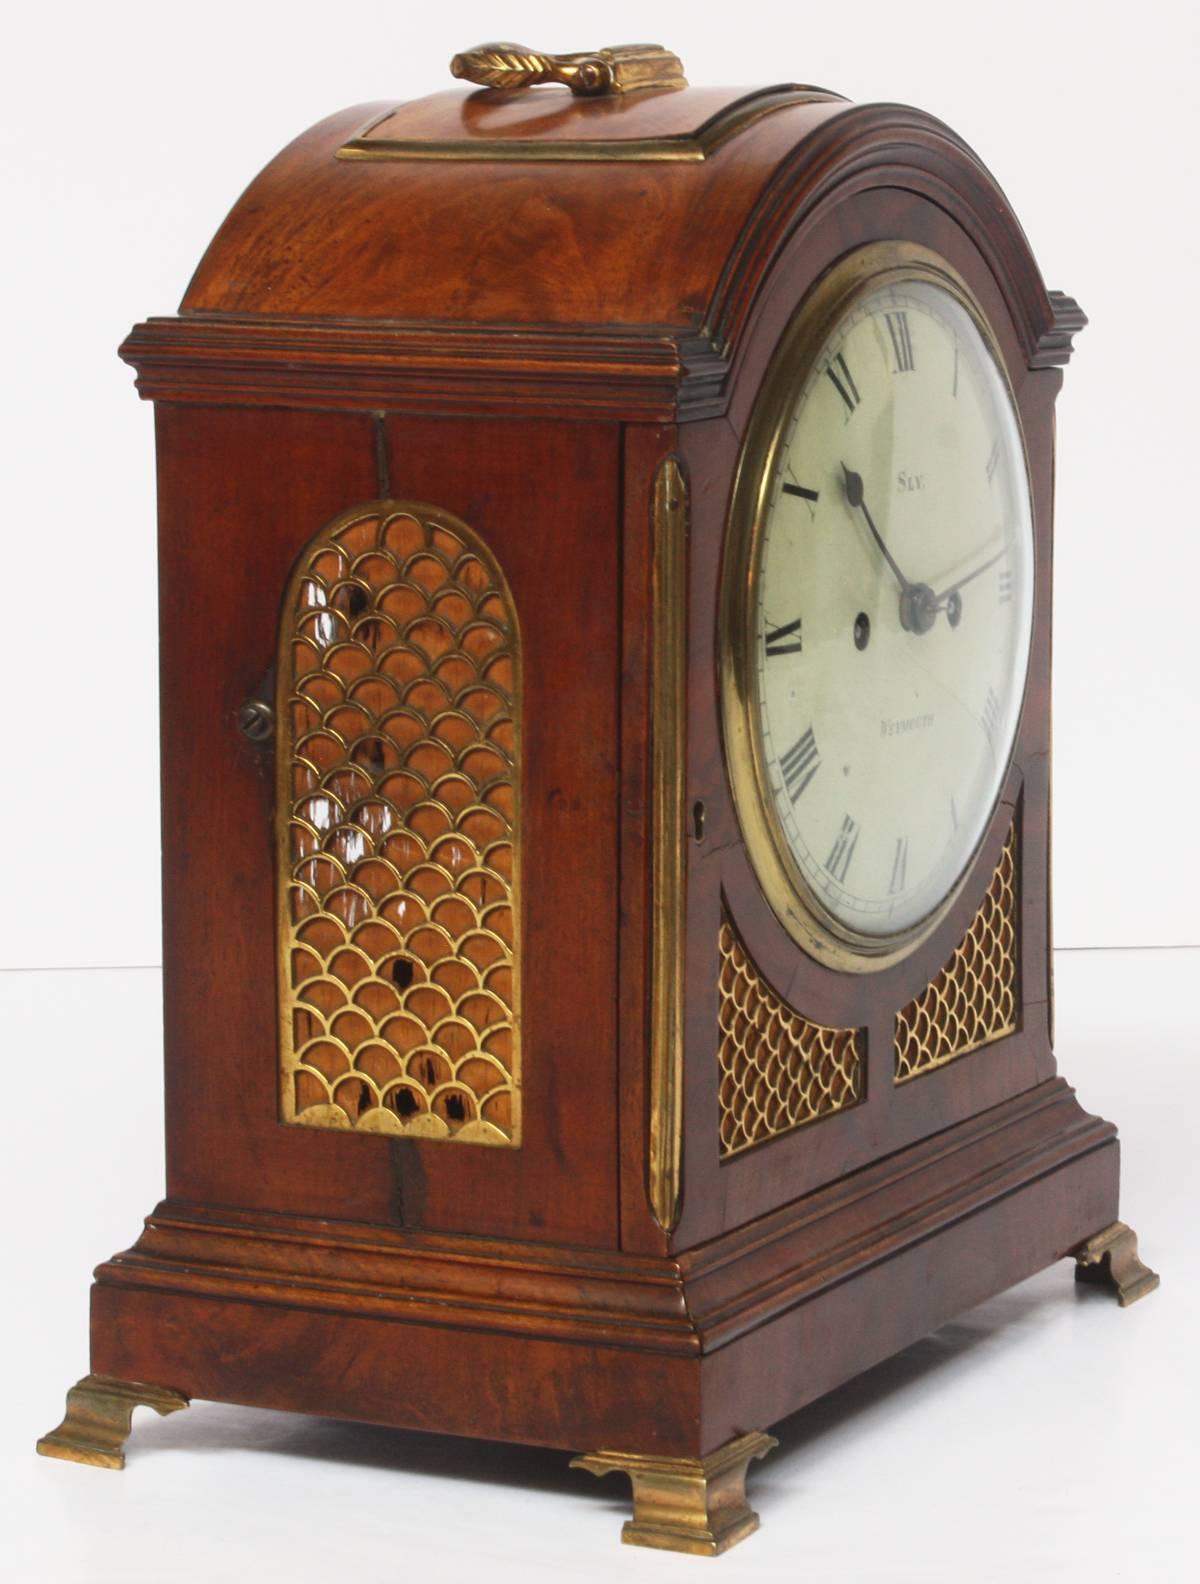 a fine George II period mahogany bracket clock by Sly, Weymouth, England, on top is a brass carrying handle and a full opening front door with a cast brass bezel and convex glass, the white convex enamel 7